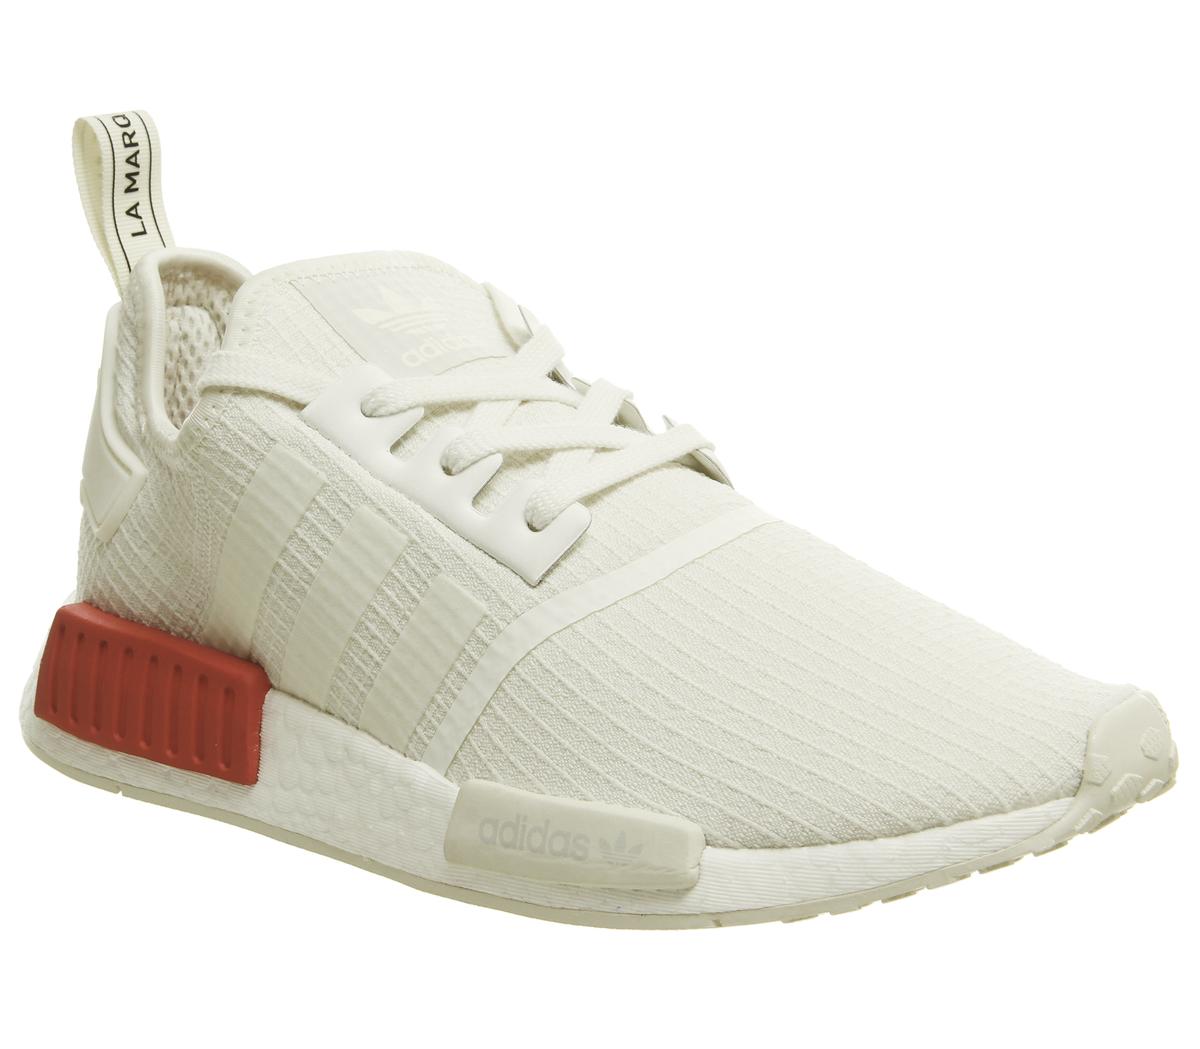 adidas nmd r1 red and white